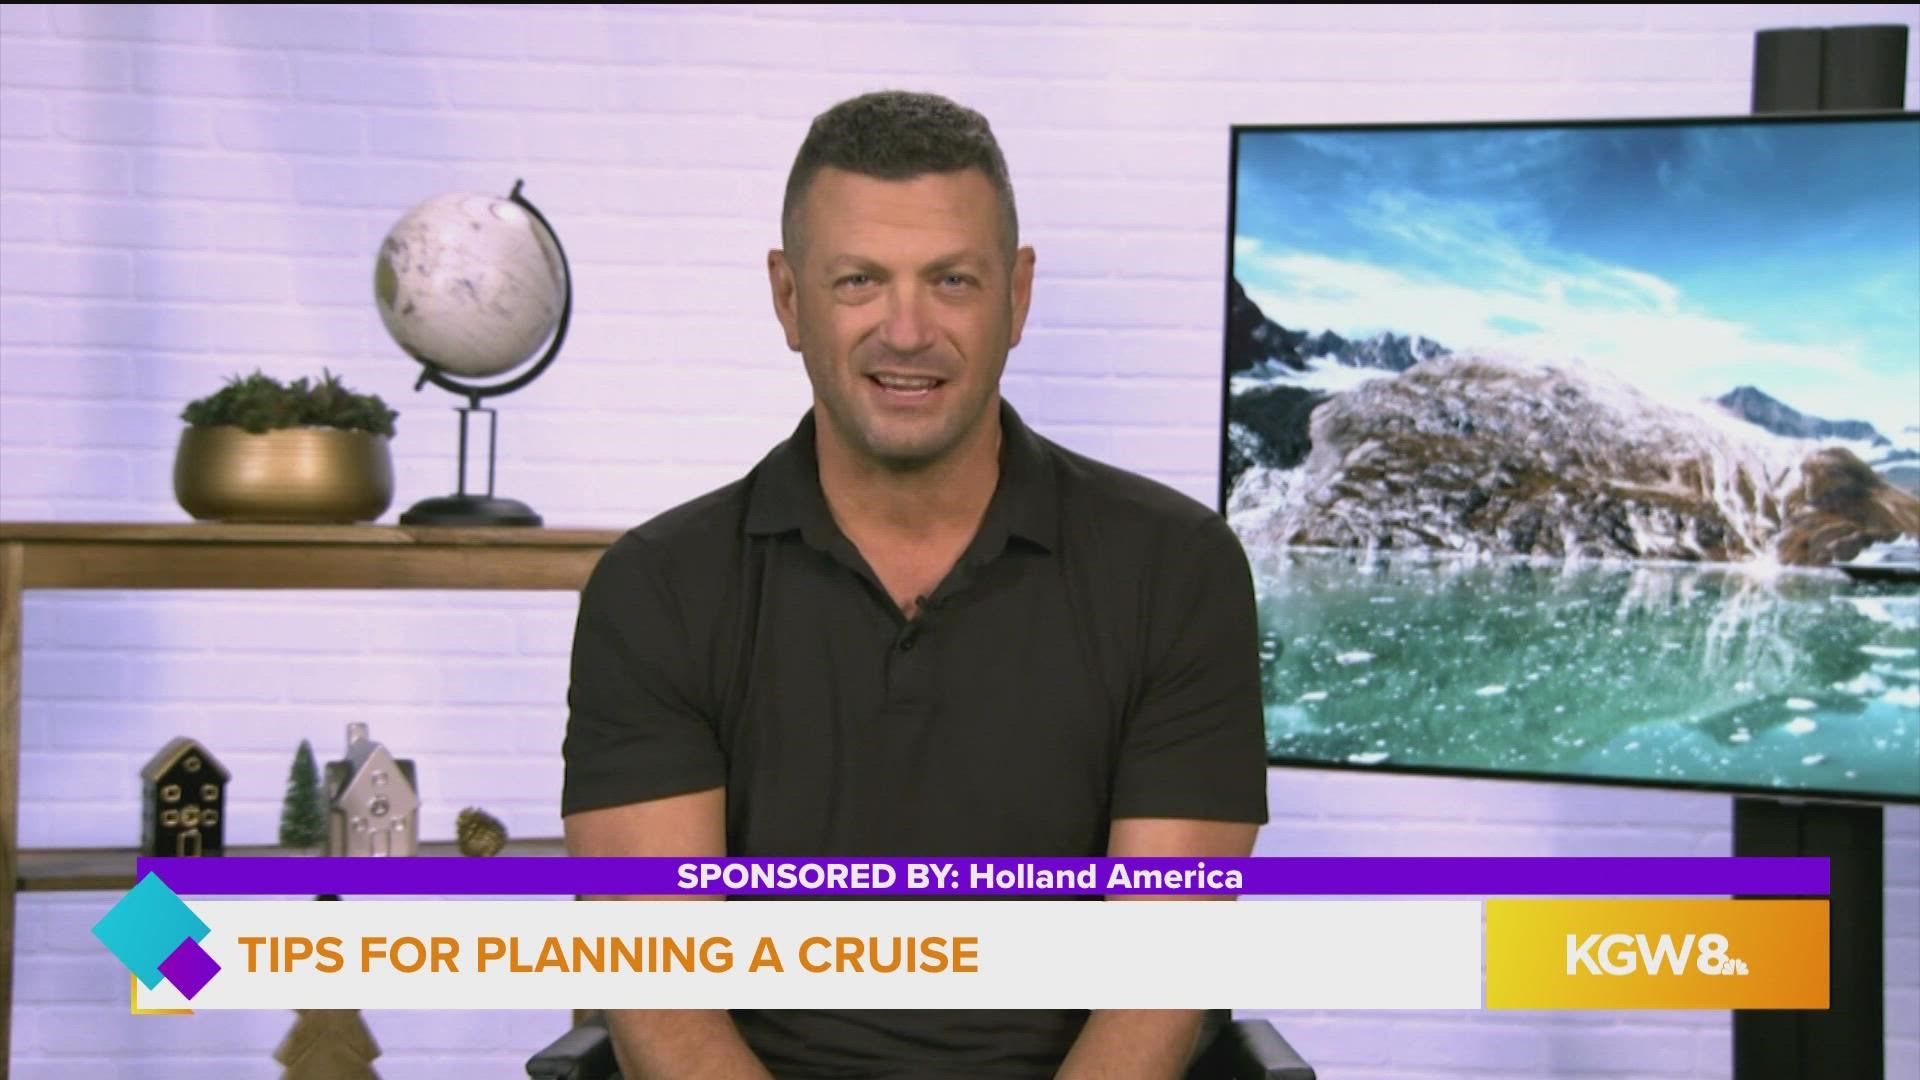 This segment is sponsored by Holland America